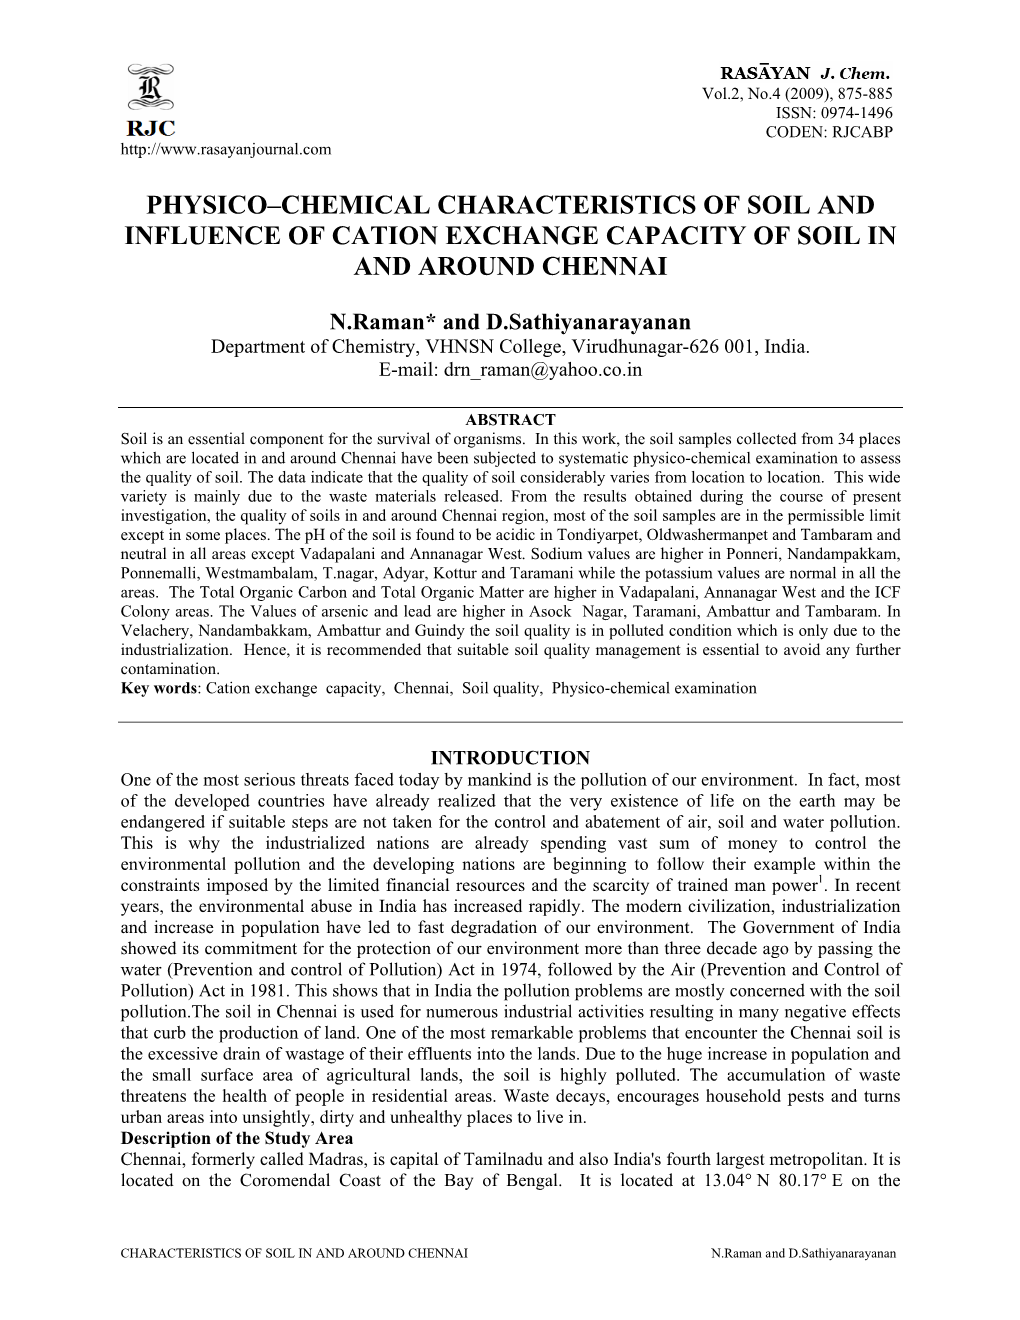 Physico–Chemical Characteristics of Soil and Influence of Cation Exchange Capacity of Soil in and Around Chennai